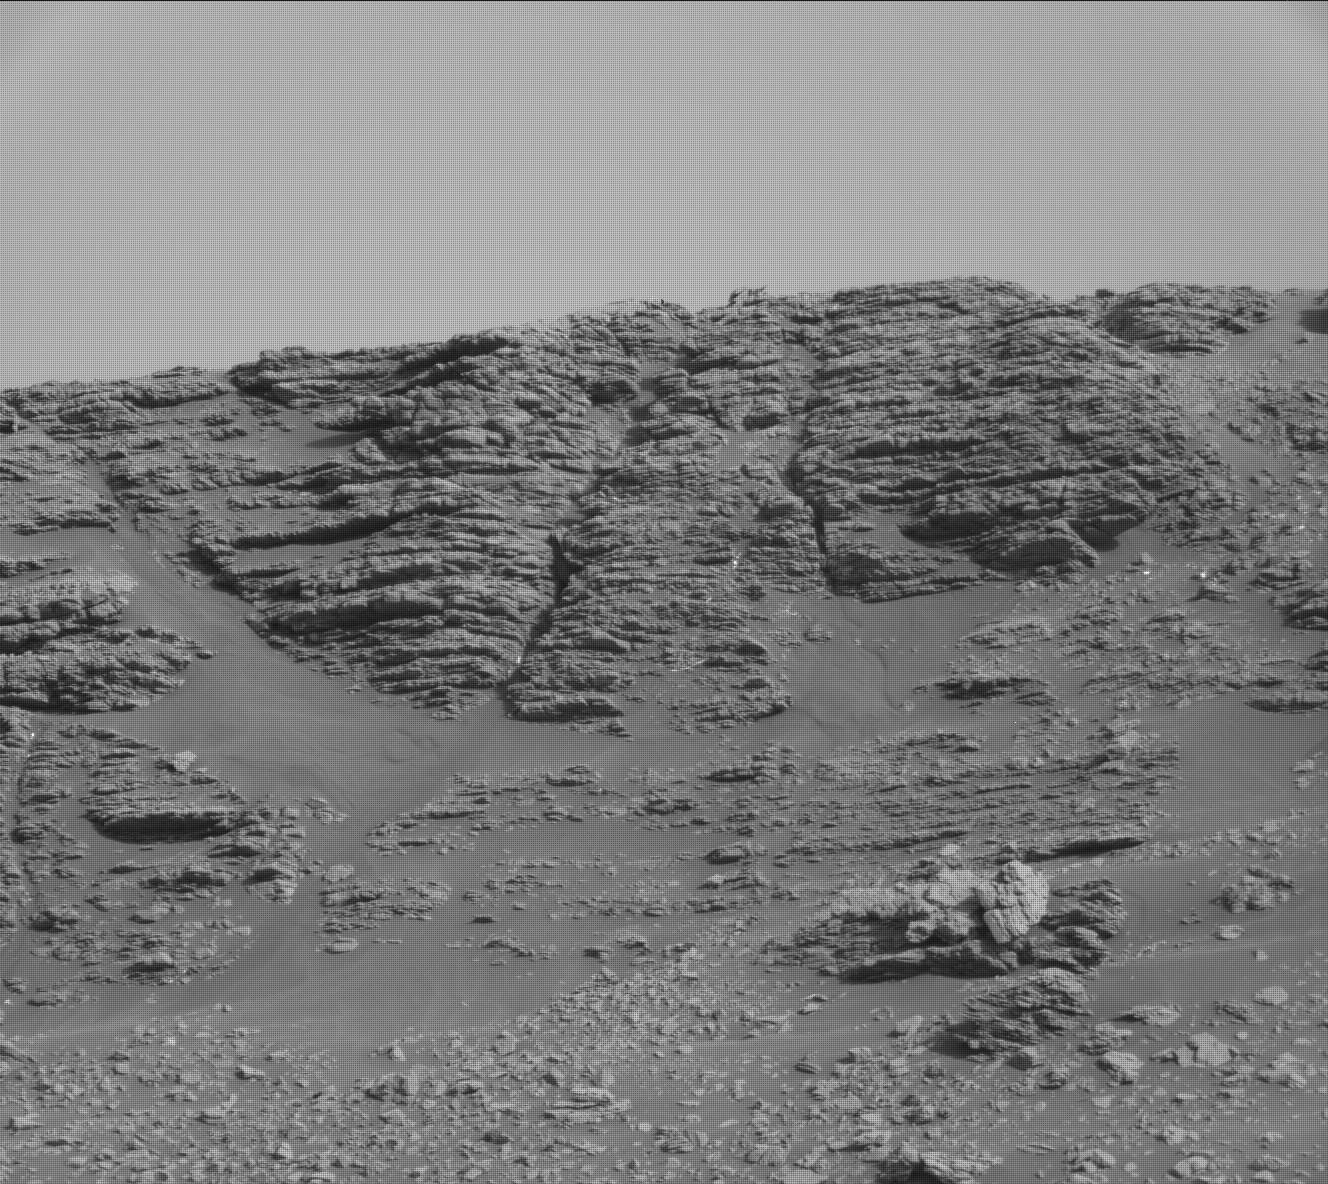 Sol 2474: A Great Outcrop!